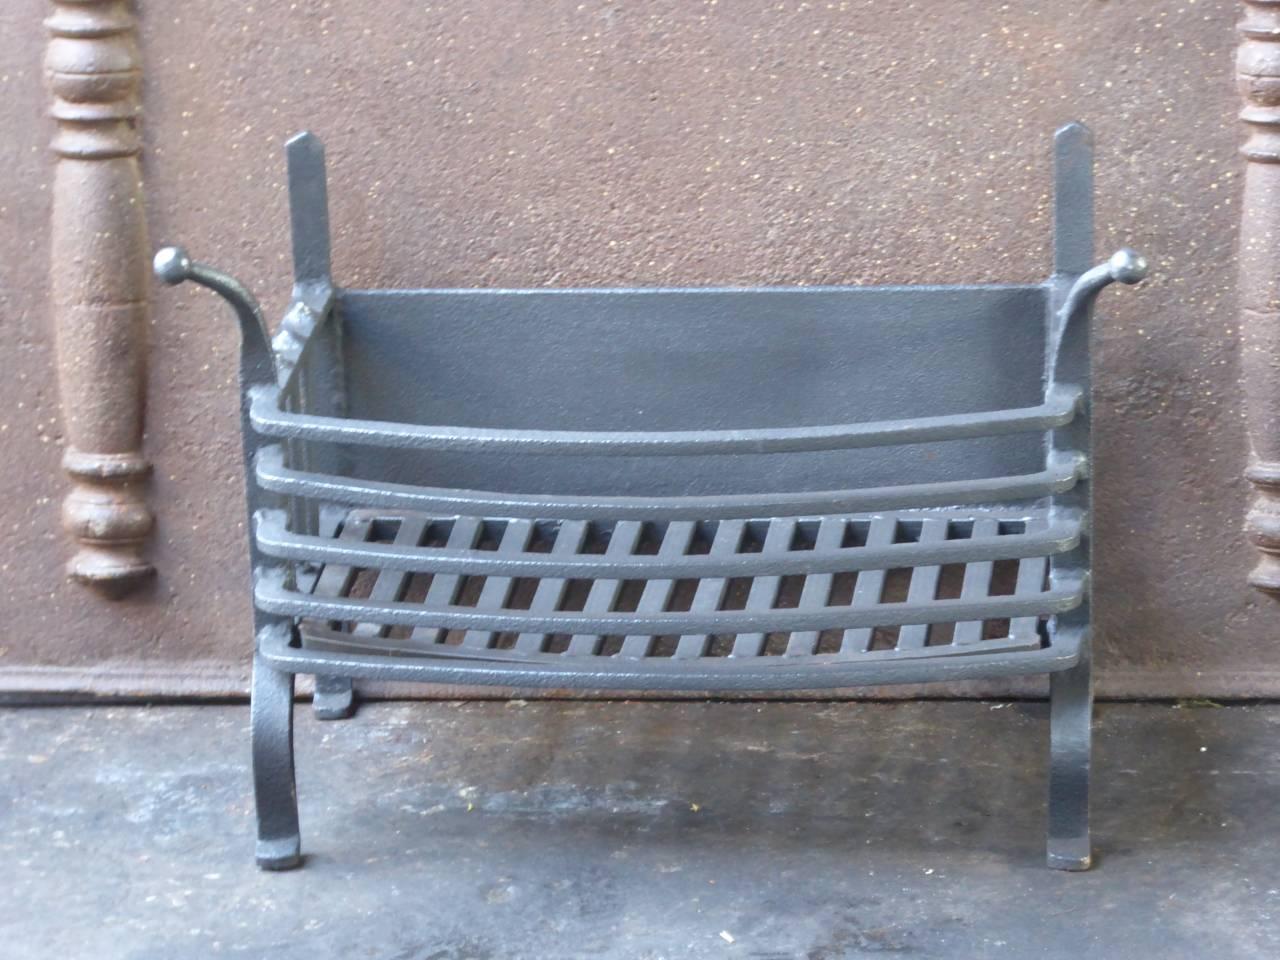 19th century English Victorian fireplace grate made of wrought iron.

We have a unique and specialized collection of antique and used fireplace accessories consisting of more than 1000 listings at 1stdibs. Amongst others, we always have 300+